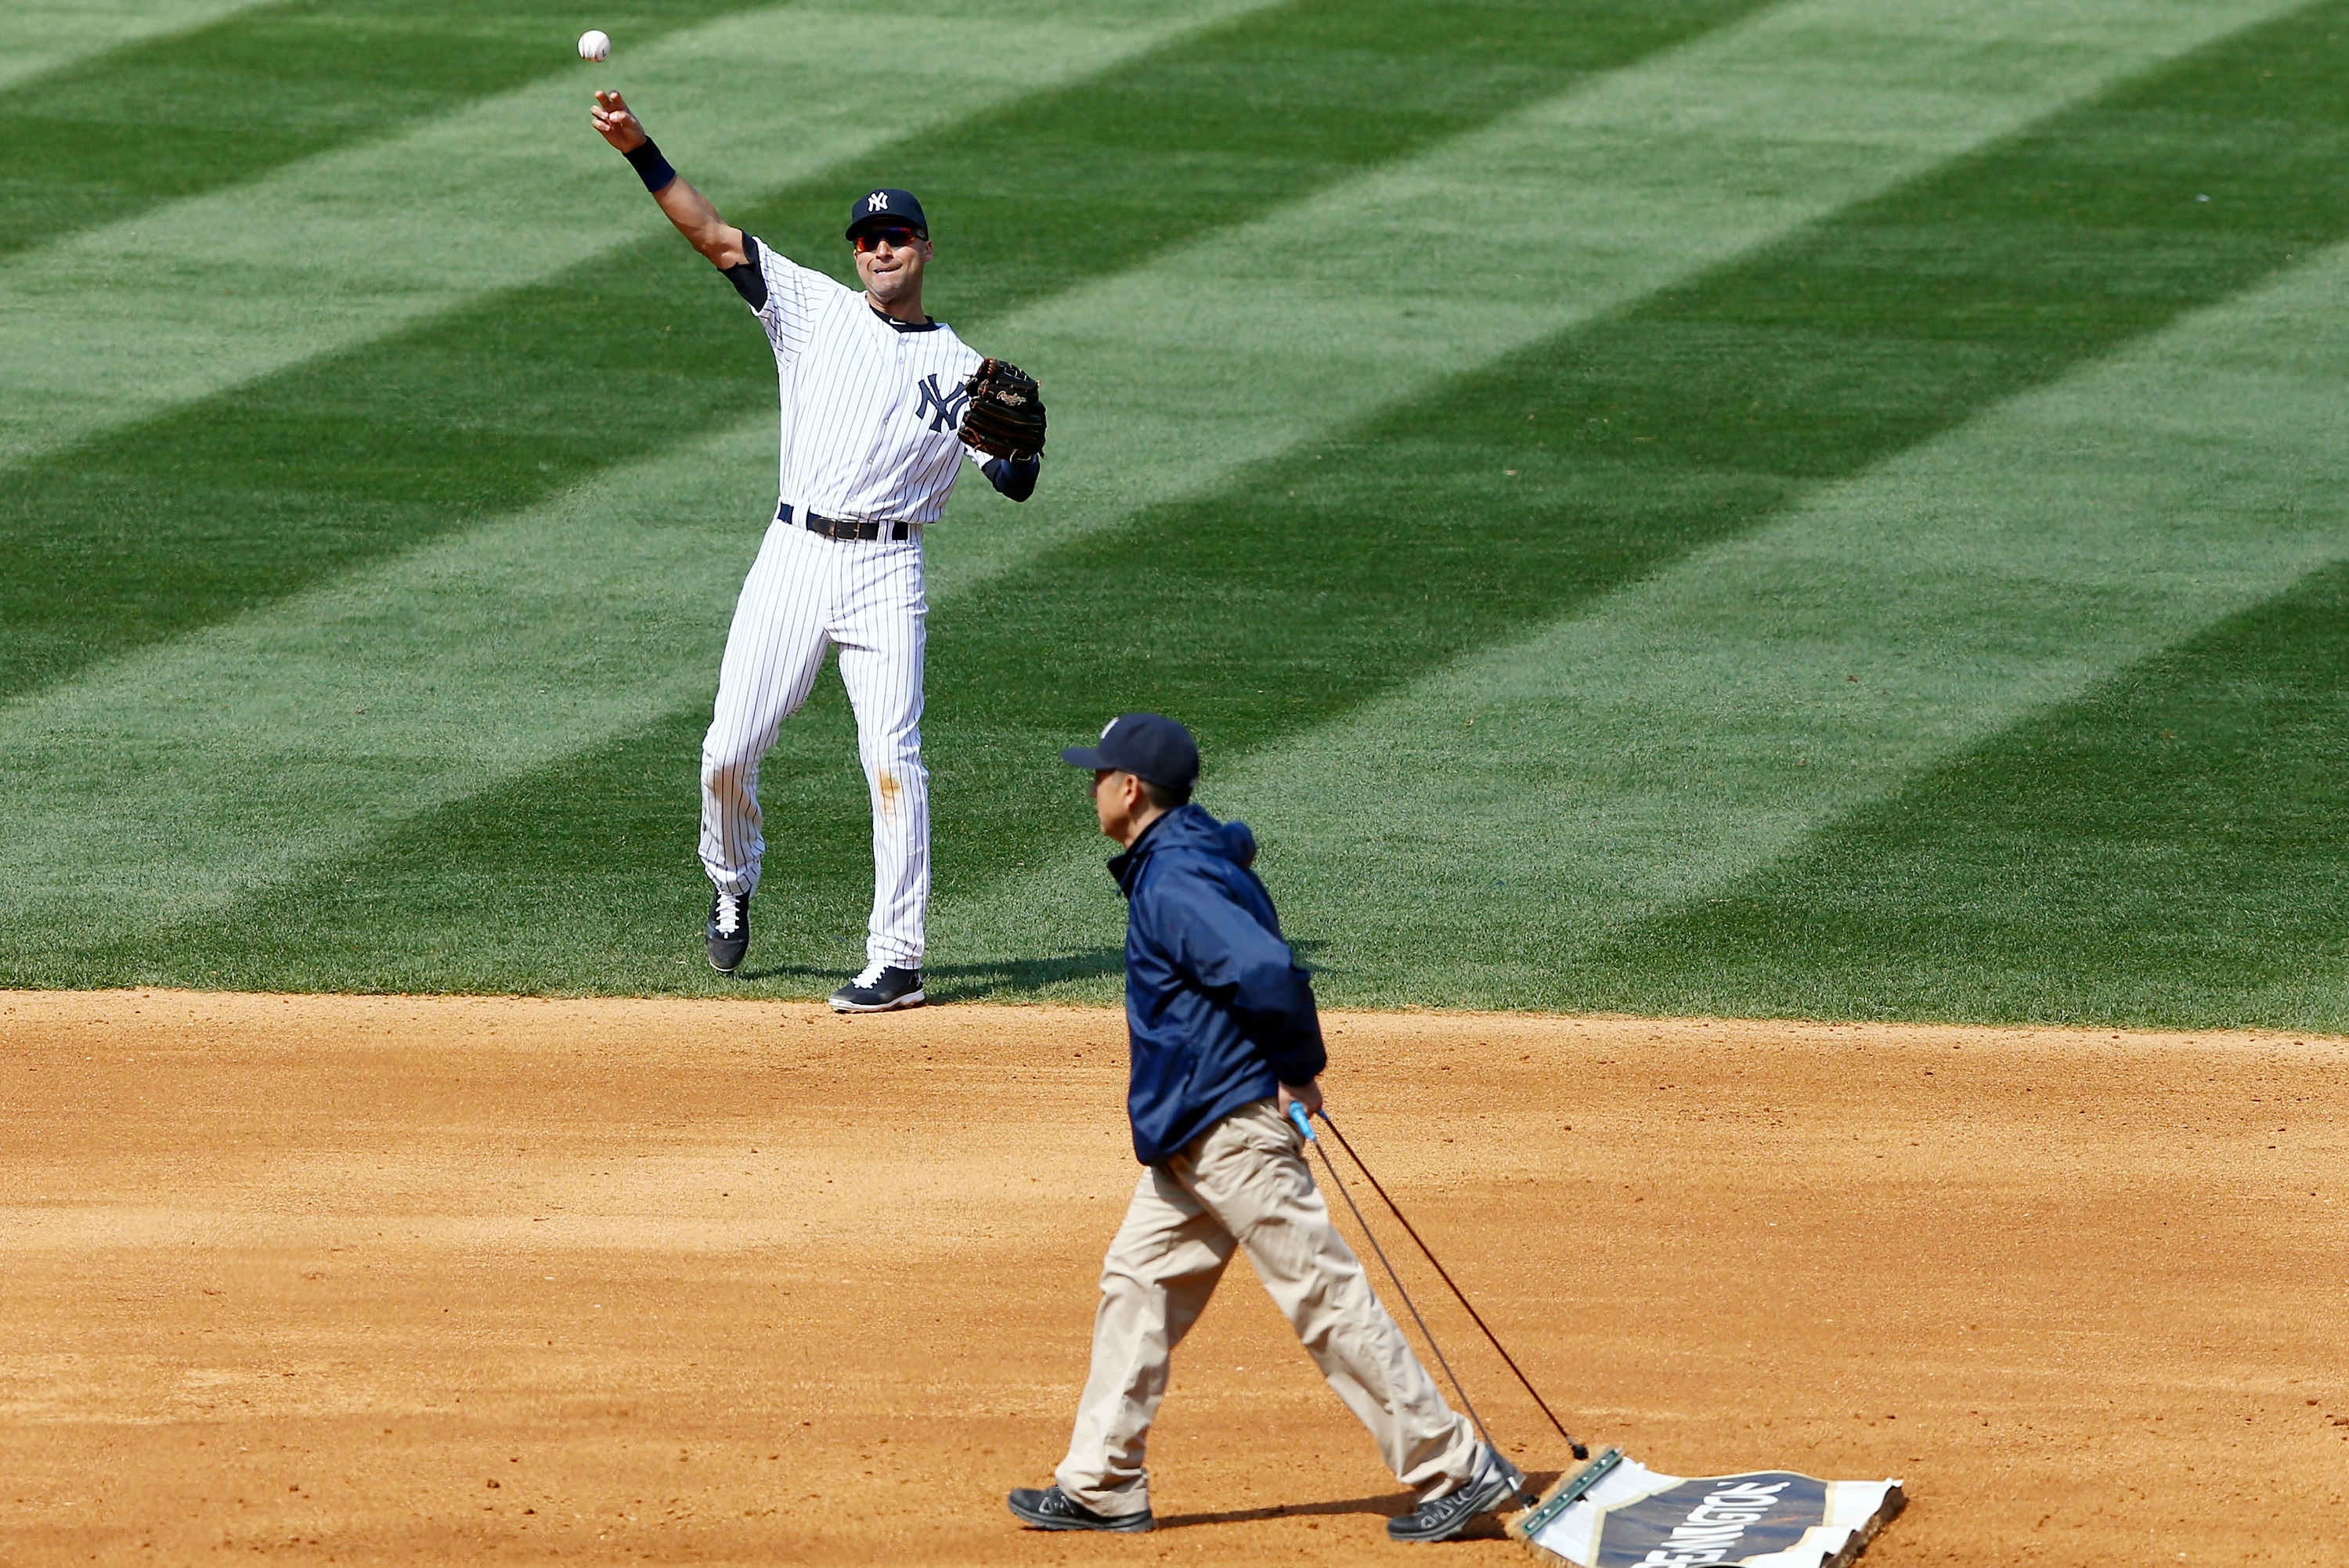 Girardi had 'no inkling' about Jeter retirement